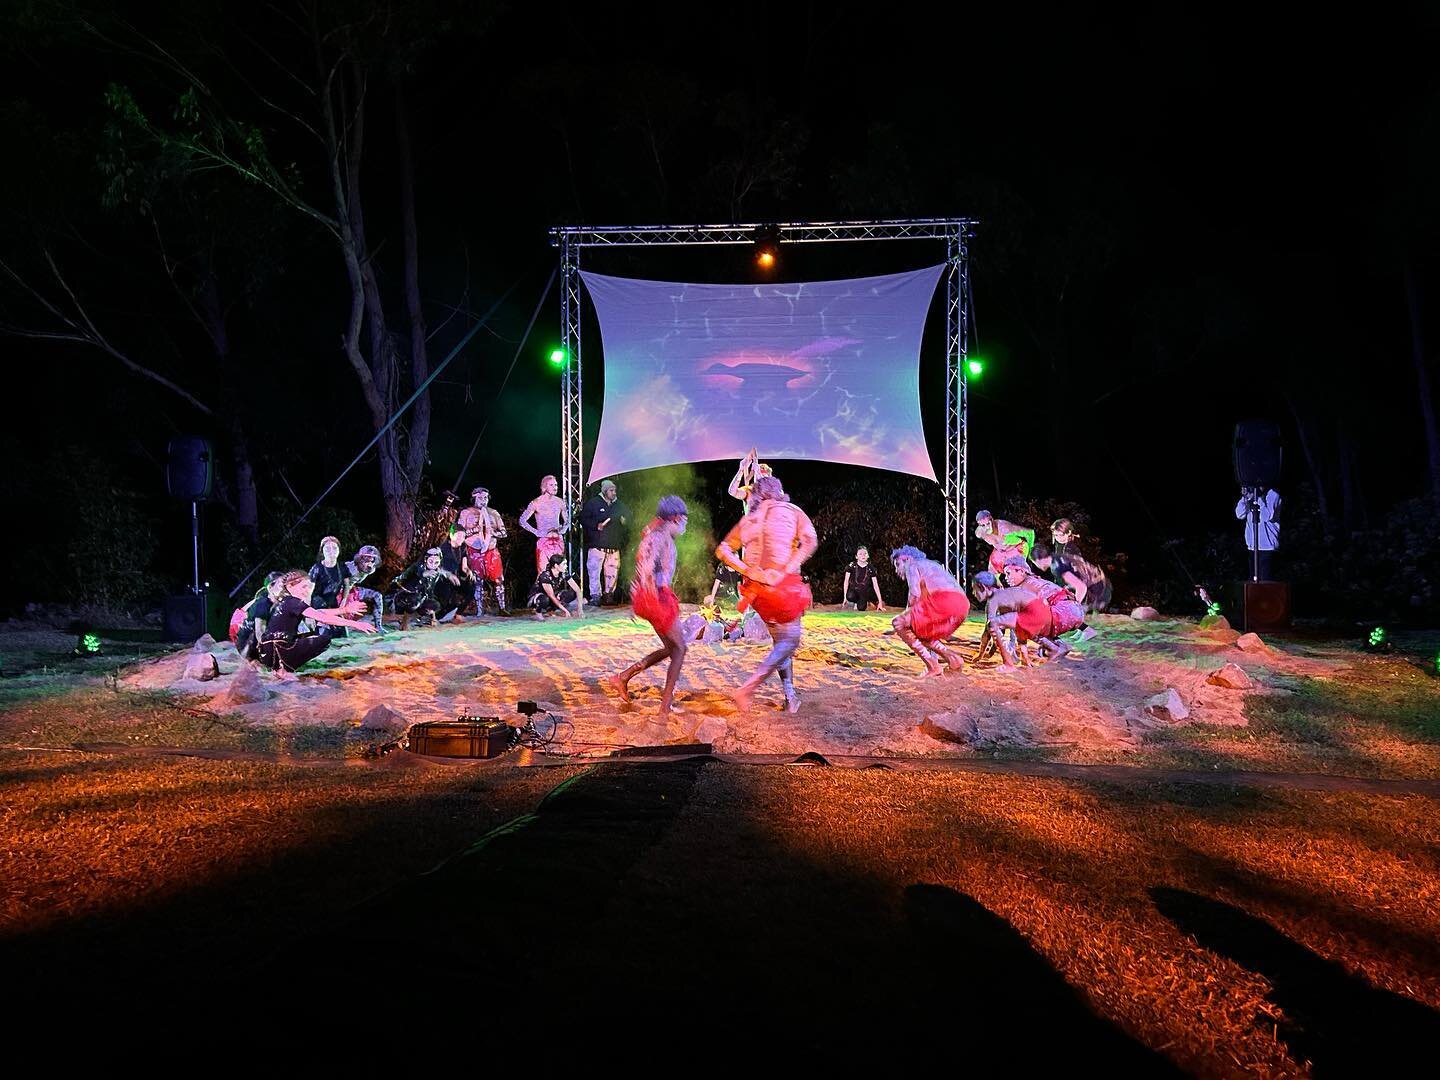 A blissful eve in the natural amphitheater of trees at @umbarraculturalcentre - a calm warm eve for the immersive, spiritual, educational and inspiring Bulla Midhong performance - danced, written and sung about Mother Mountain Gulaga by the young peo